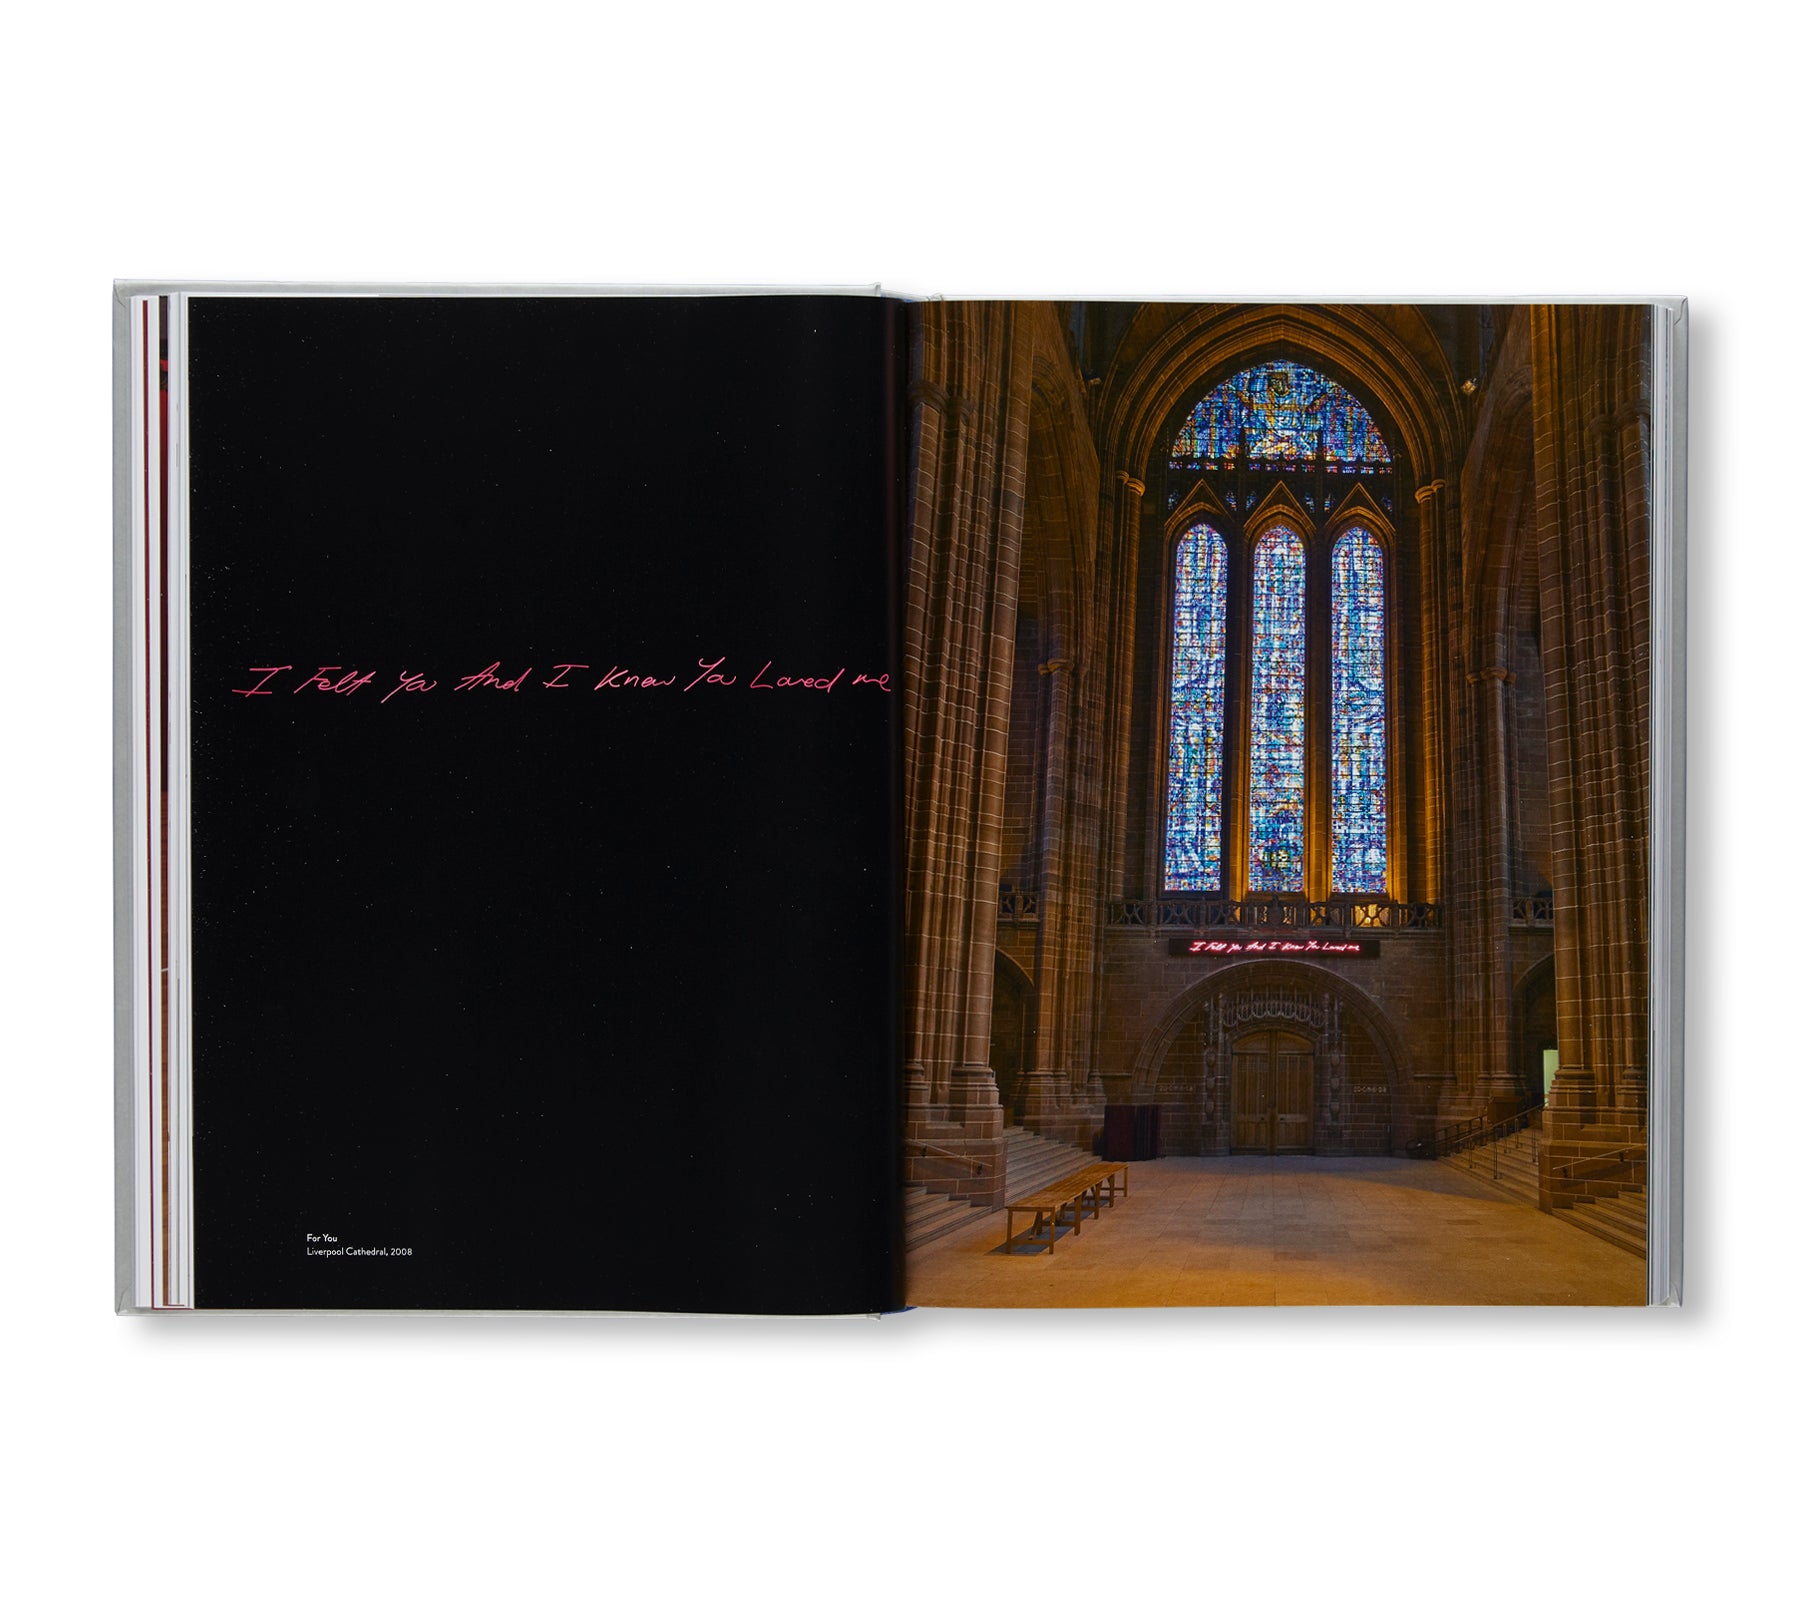 TRACEY EMIN – WORKS 2007-2017 by Tracey Emin